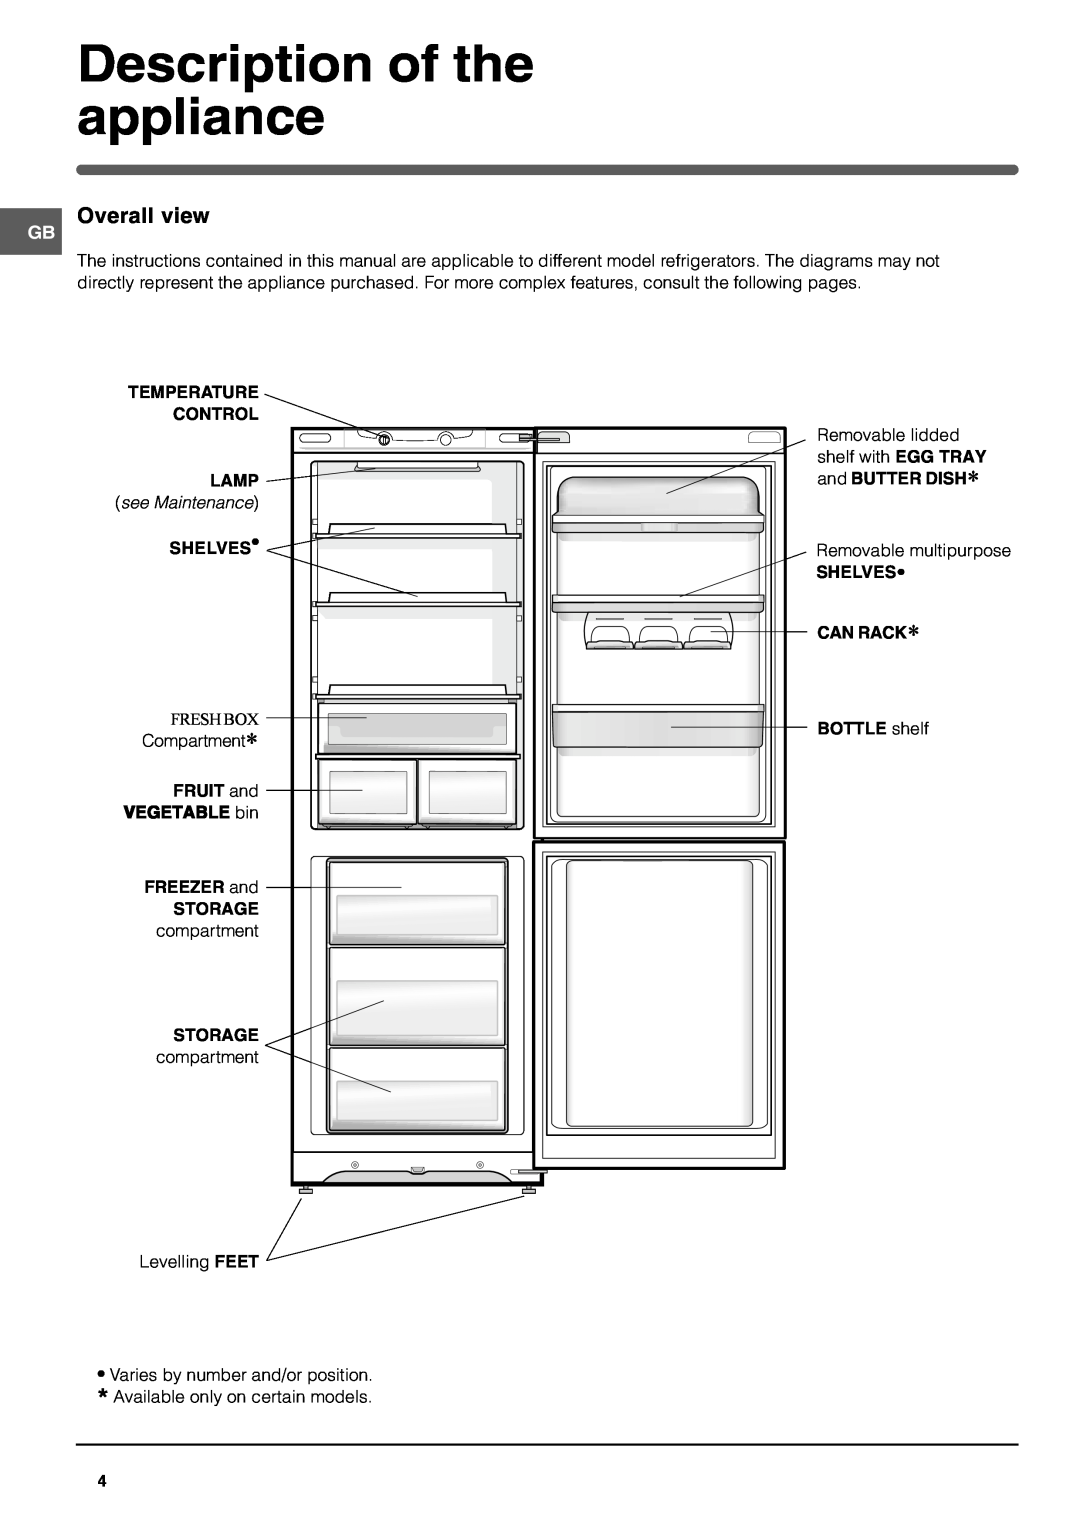 Indesit RF175BP Description of the appliance, Overall view, Lamp, see Maintenance, VEGETABLE bin, FREEZER and, Storage 